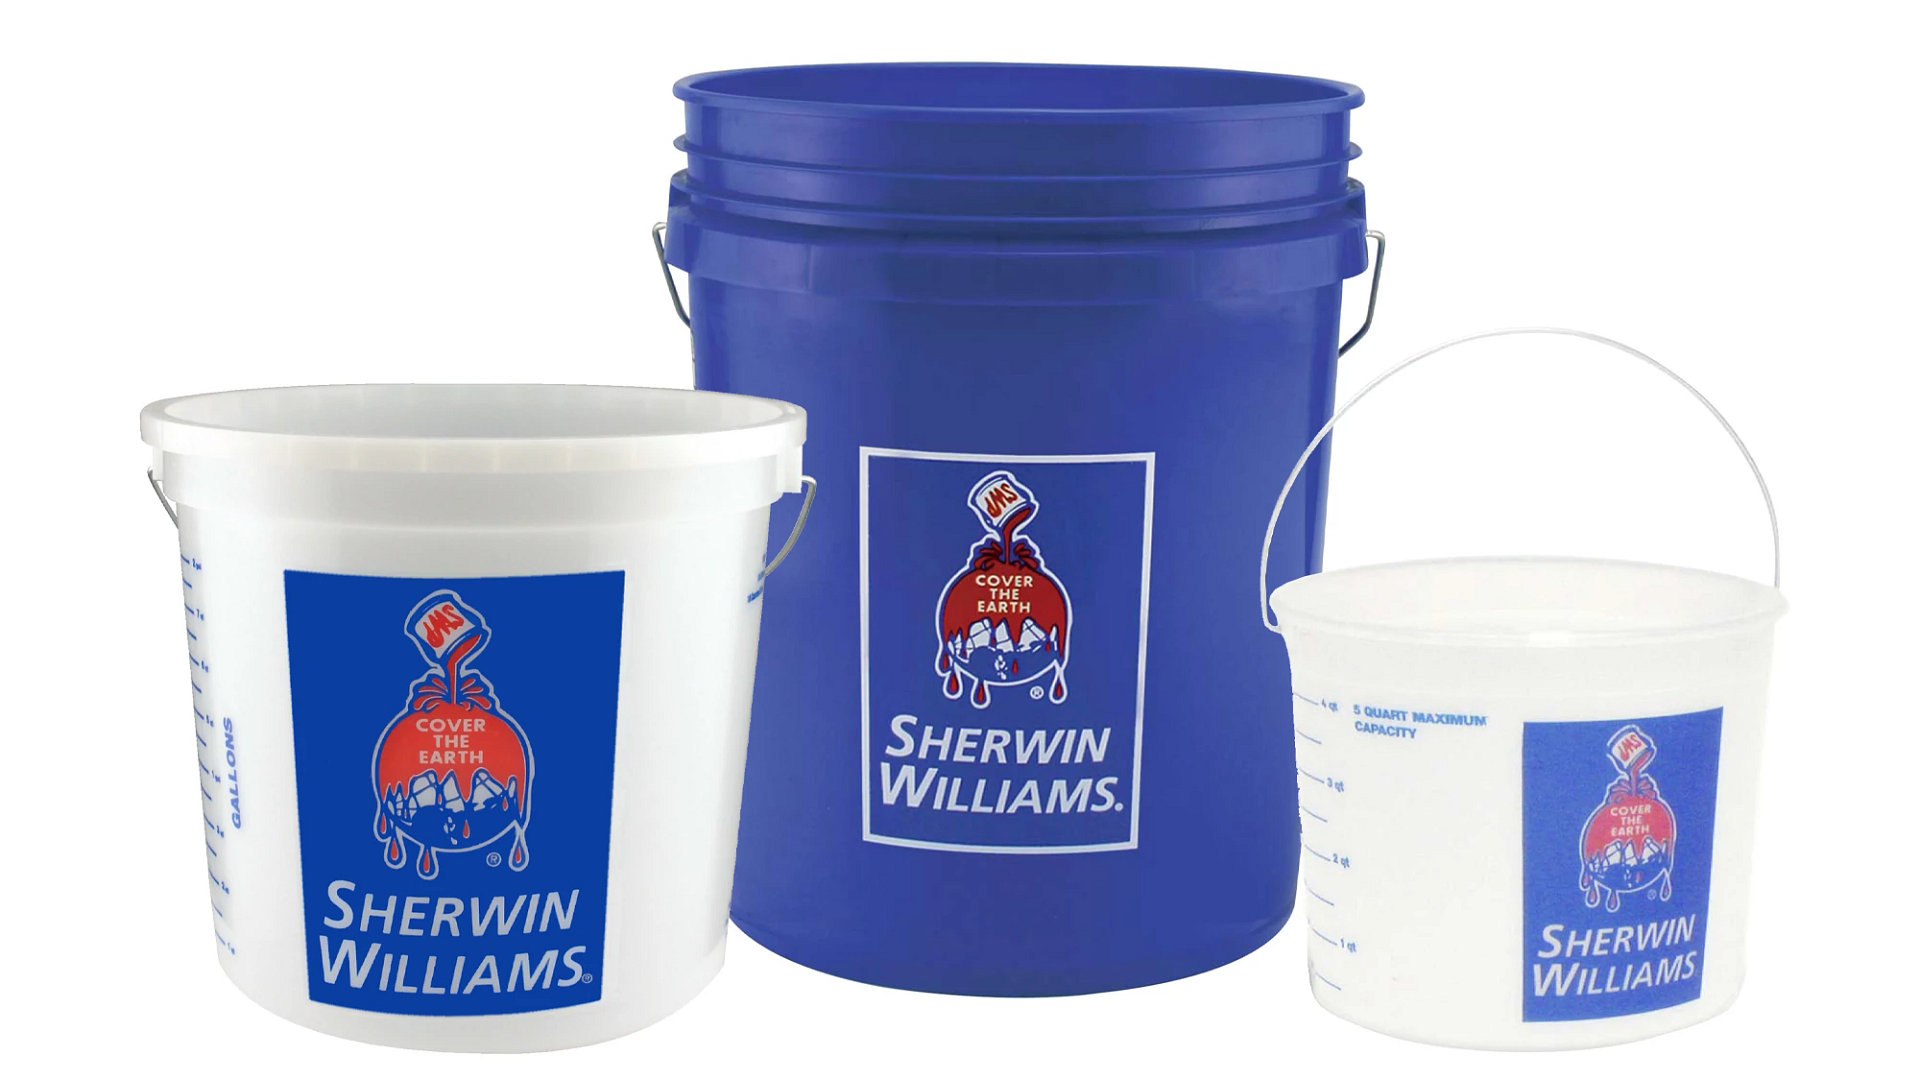 Small Plastic Buckets For Storage and Utility 